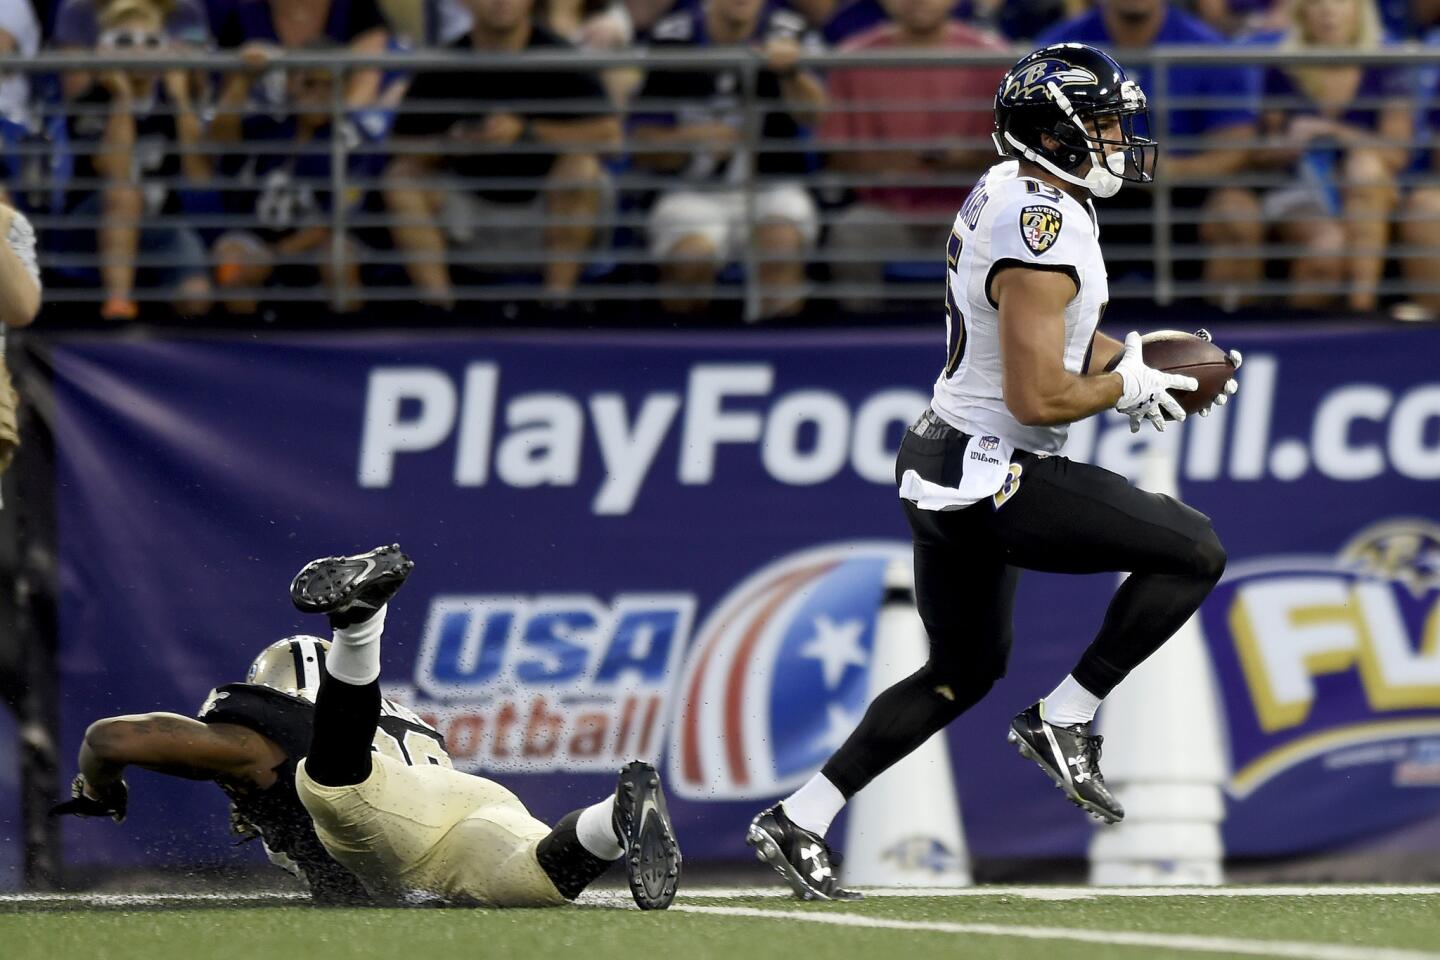 Through no fault of his own, Campanaro hasn’t gotten much attention in the Ravens’ crowded wide receiver crew this summer. More of the focus has been on who hasn’t been around (Breshad Perriman and Marlon Brown) and who might emerge (DeAndre Carter and Jeremy Butler) than guys like Campanaro, who runs good routes, makes catches in space, and has clear value for the slot receiver he is. Campanaro’s touchdown was a result of him finding a hole in the defense and making a play with the ball in his hands, something the Ravens will need in this diverse receiving group.